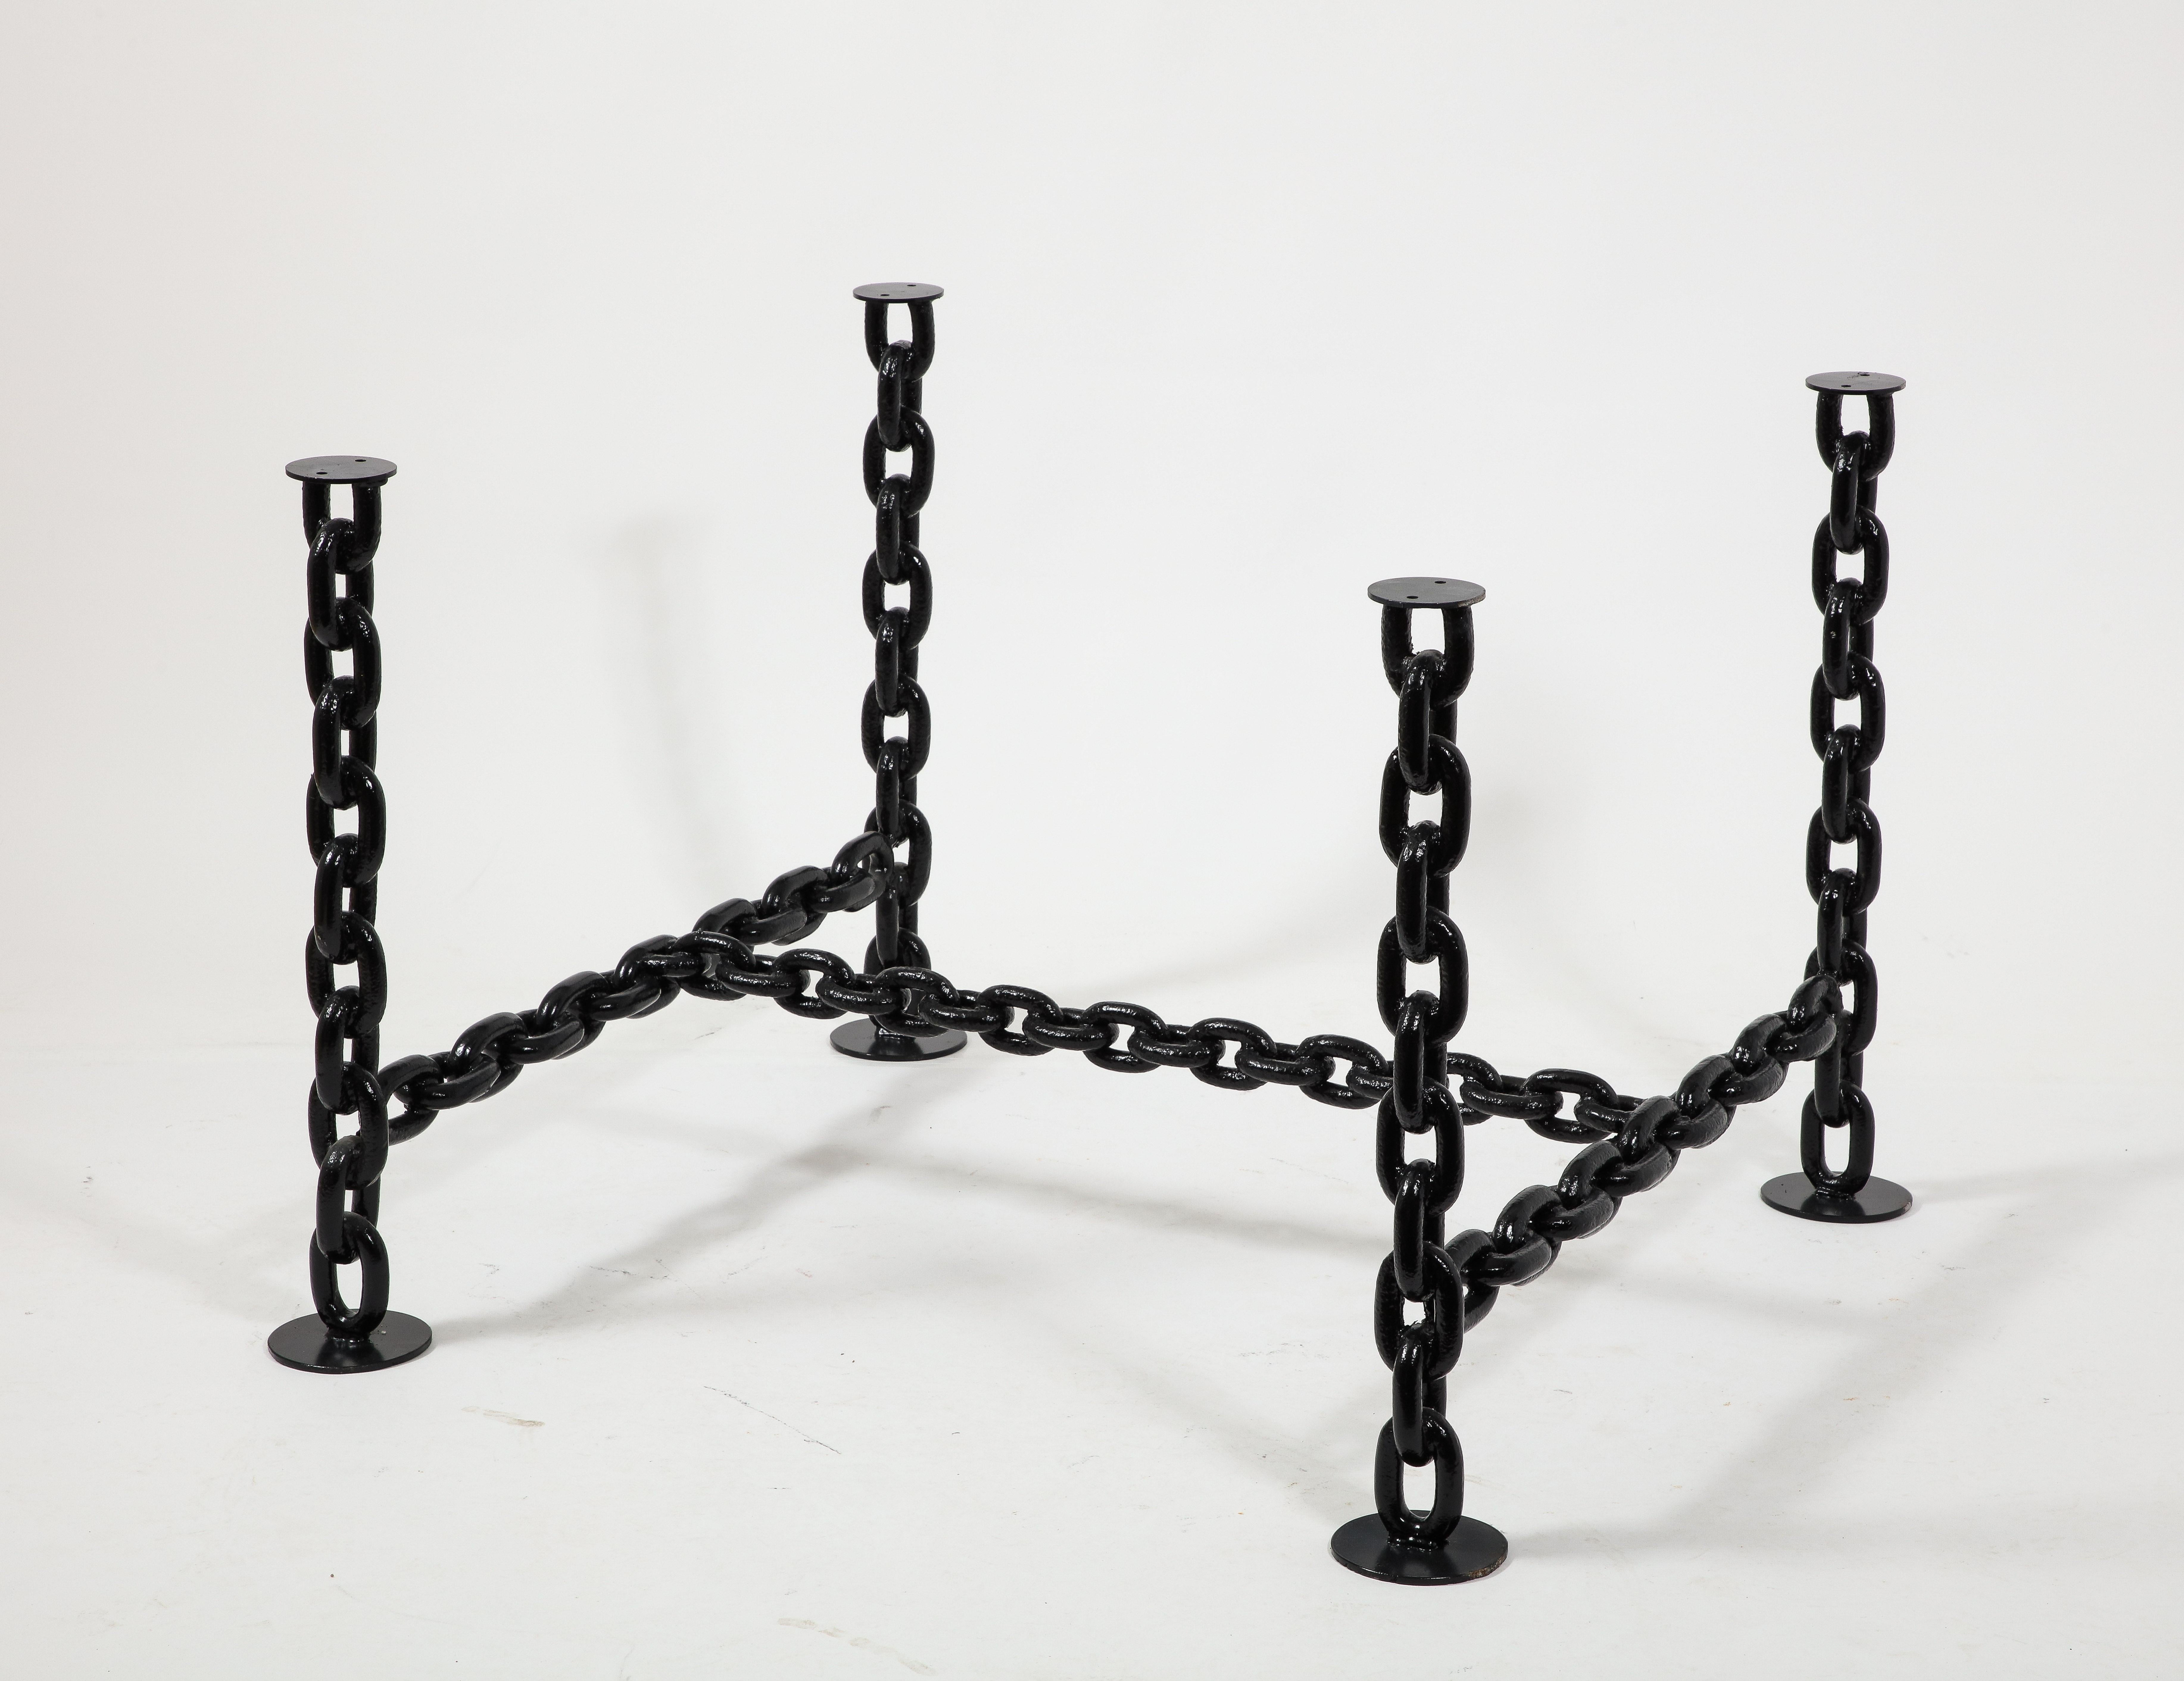 Black Lacquered Brutalist Marine Chains Dining Table Structure - France 1970s For Sale 2